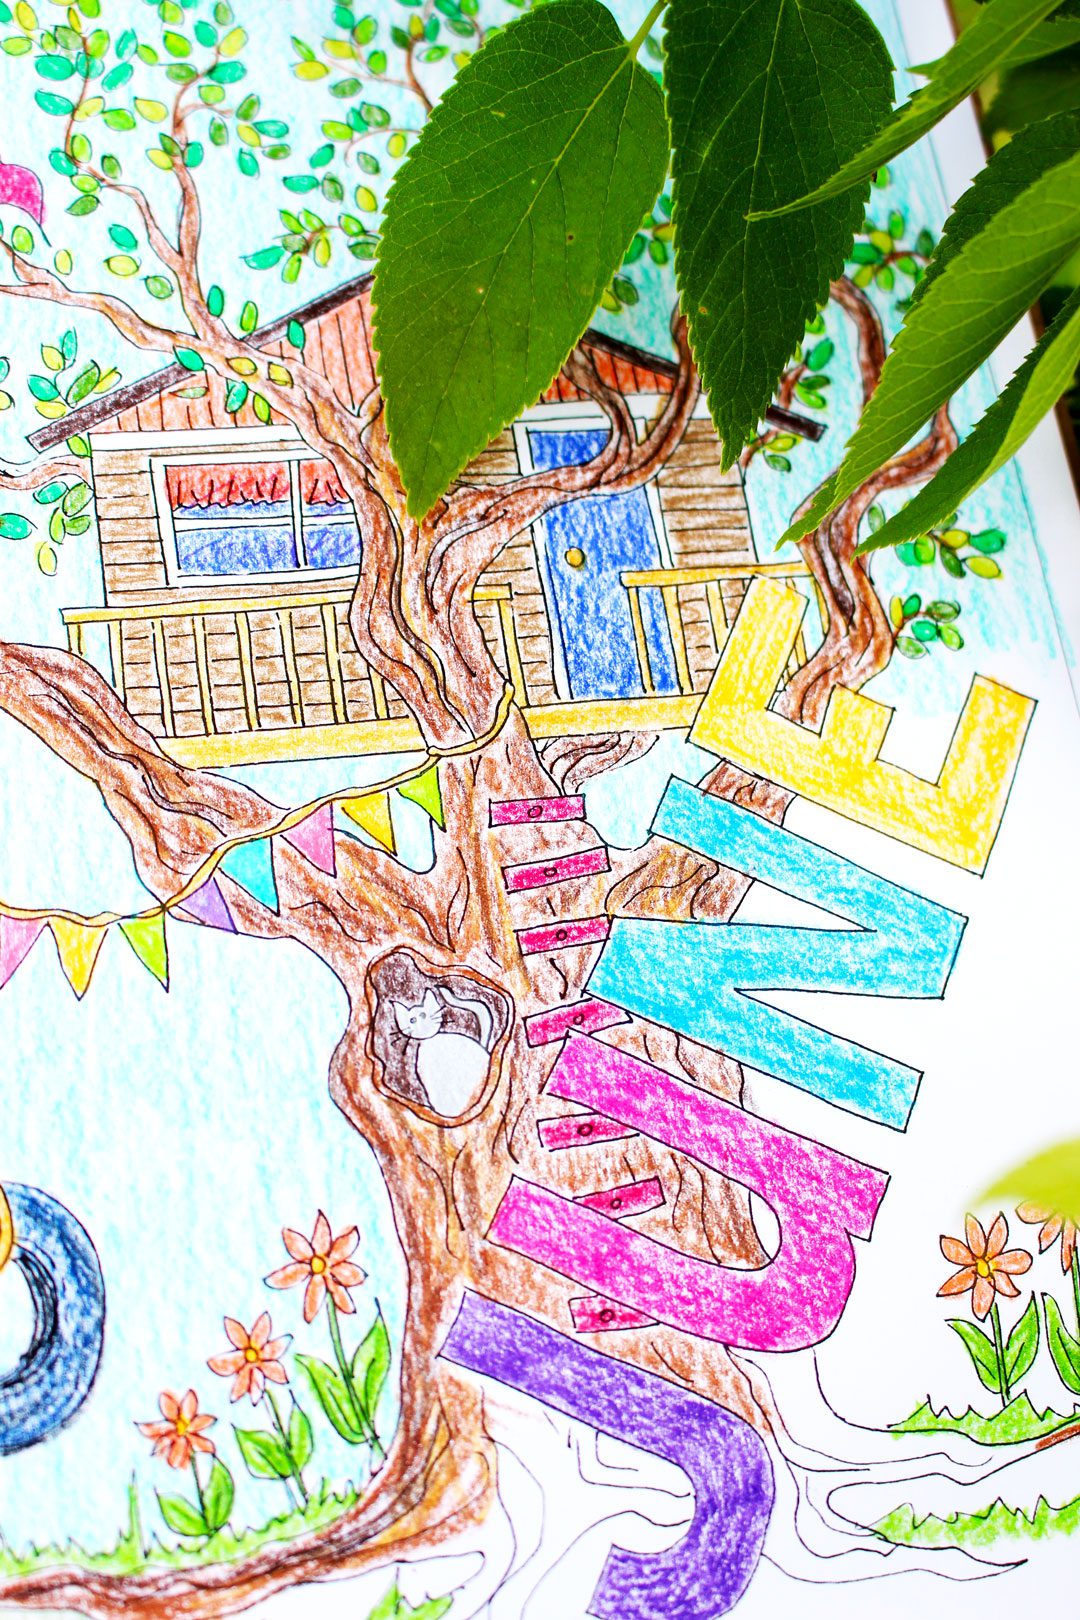 A month of June coloring page with a tree house in a large tree.